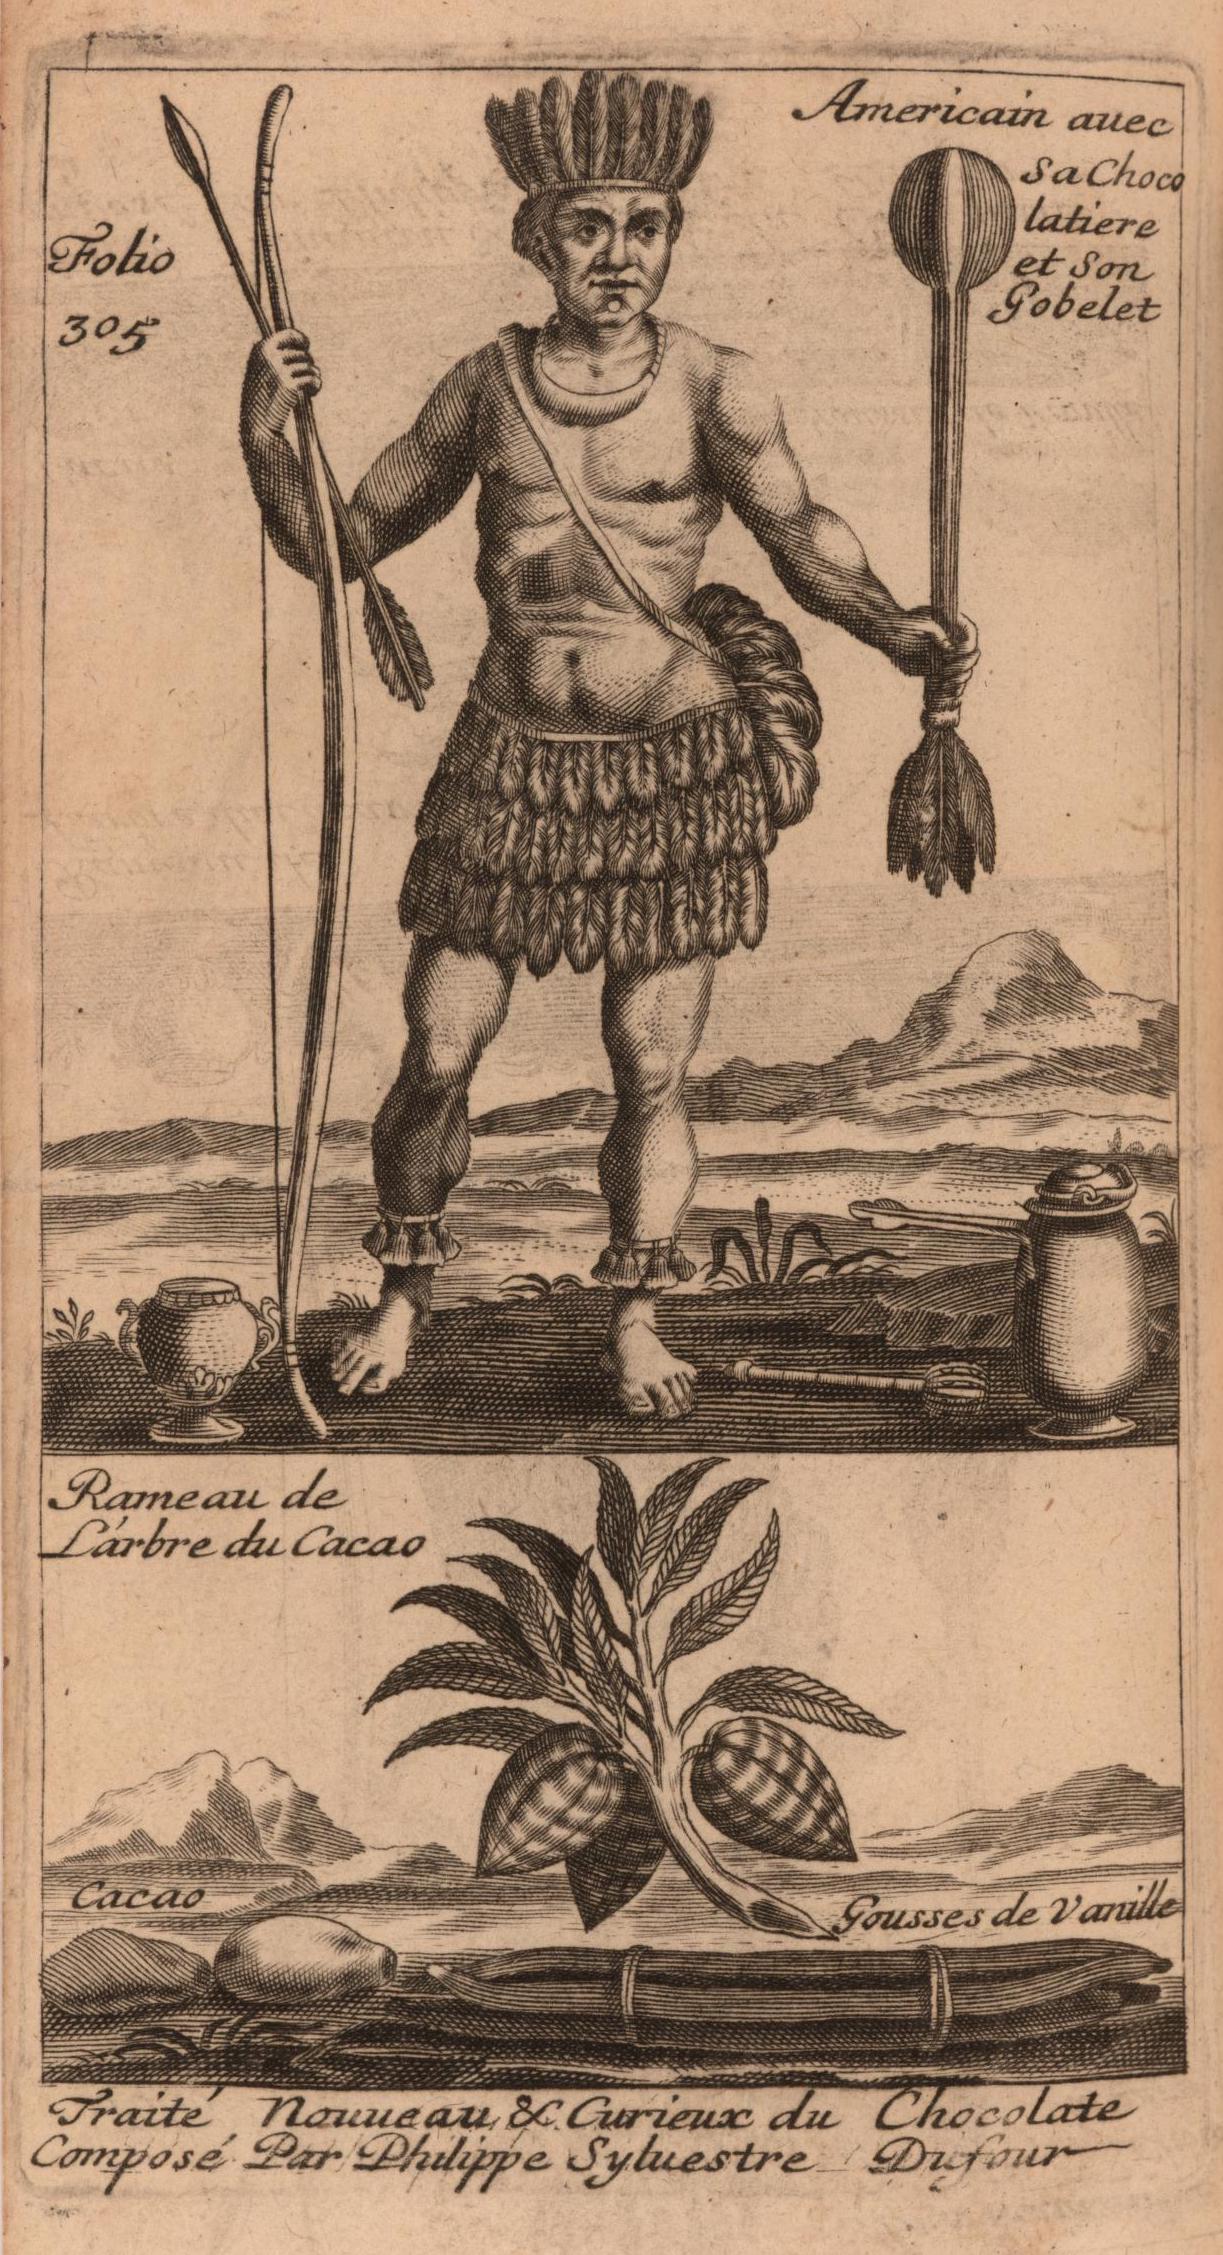 A sepia tinted printed drawing of a Mesoamerican era man holding a